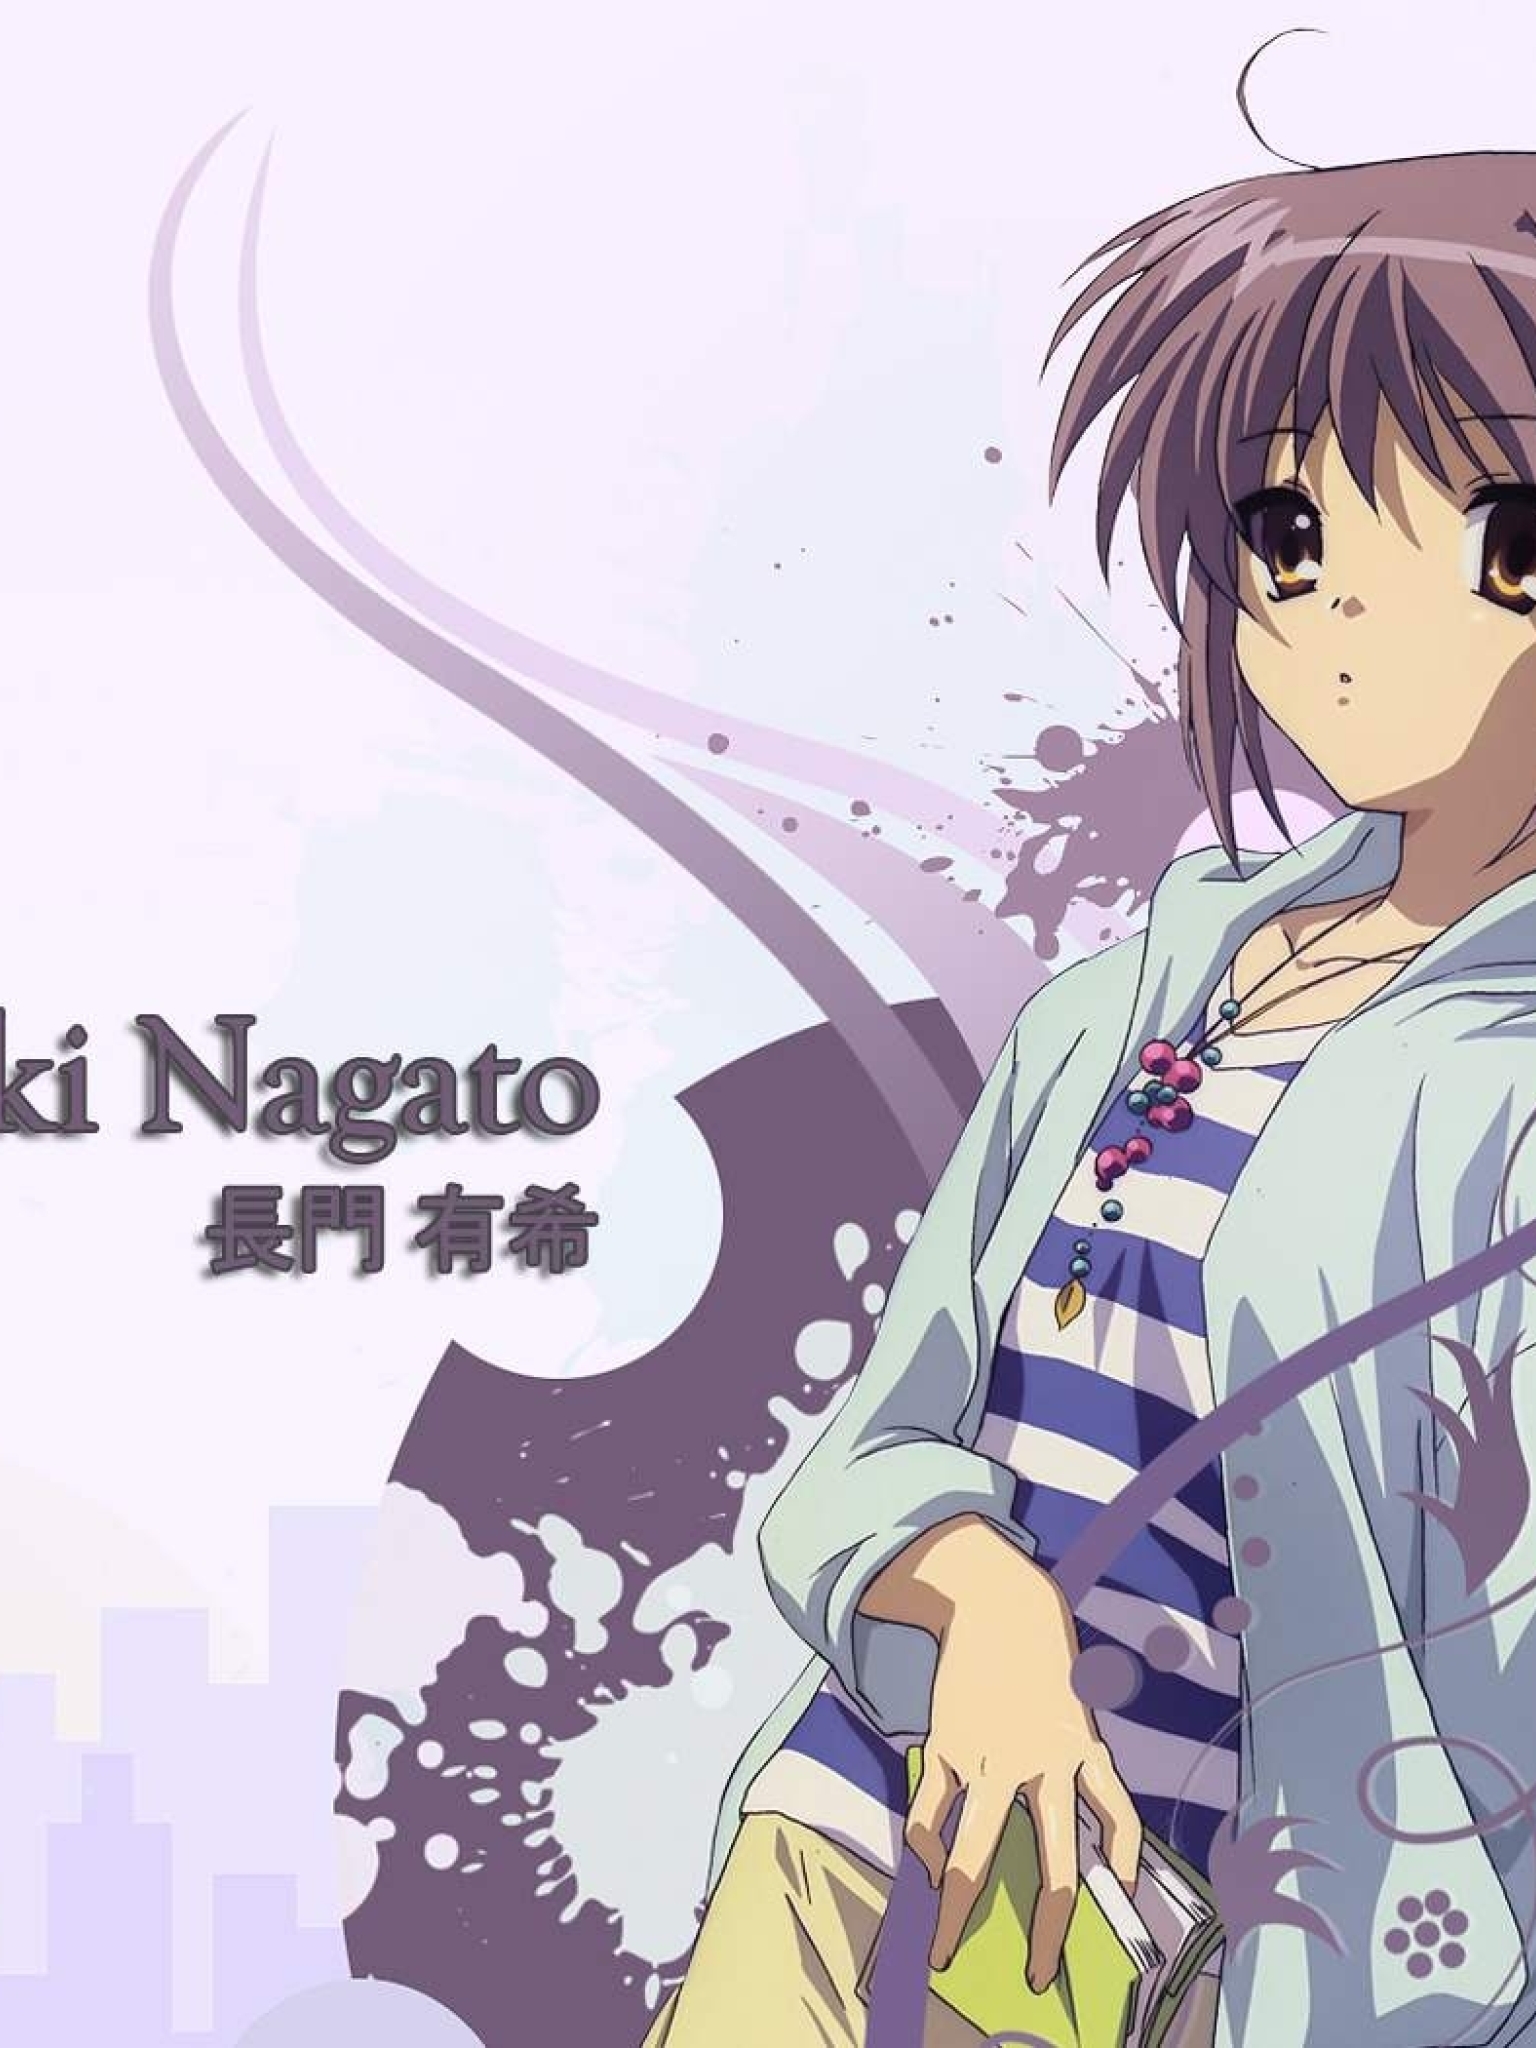 1536x48 Yuki Nagato Girl Look 1536x48 Resolution Wallpaper Hd Anime 4k Wallpapers Images Photos And Background Wallpapers Den